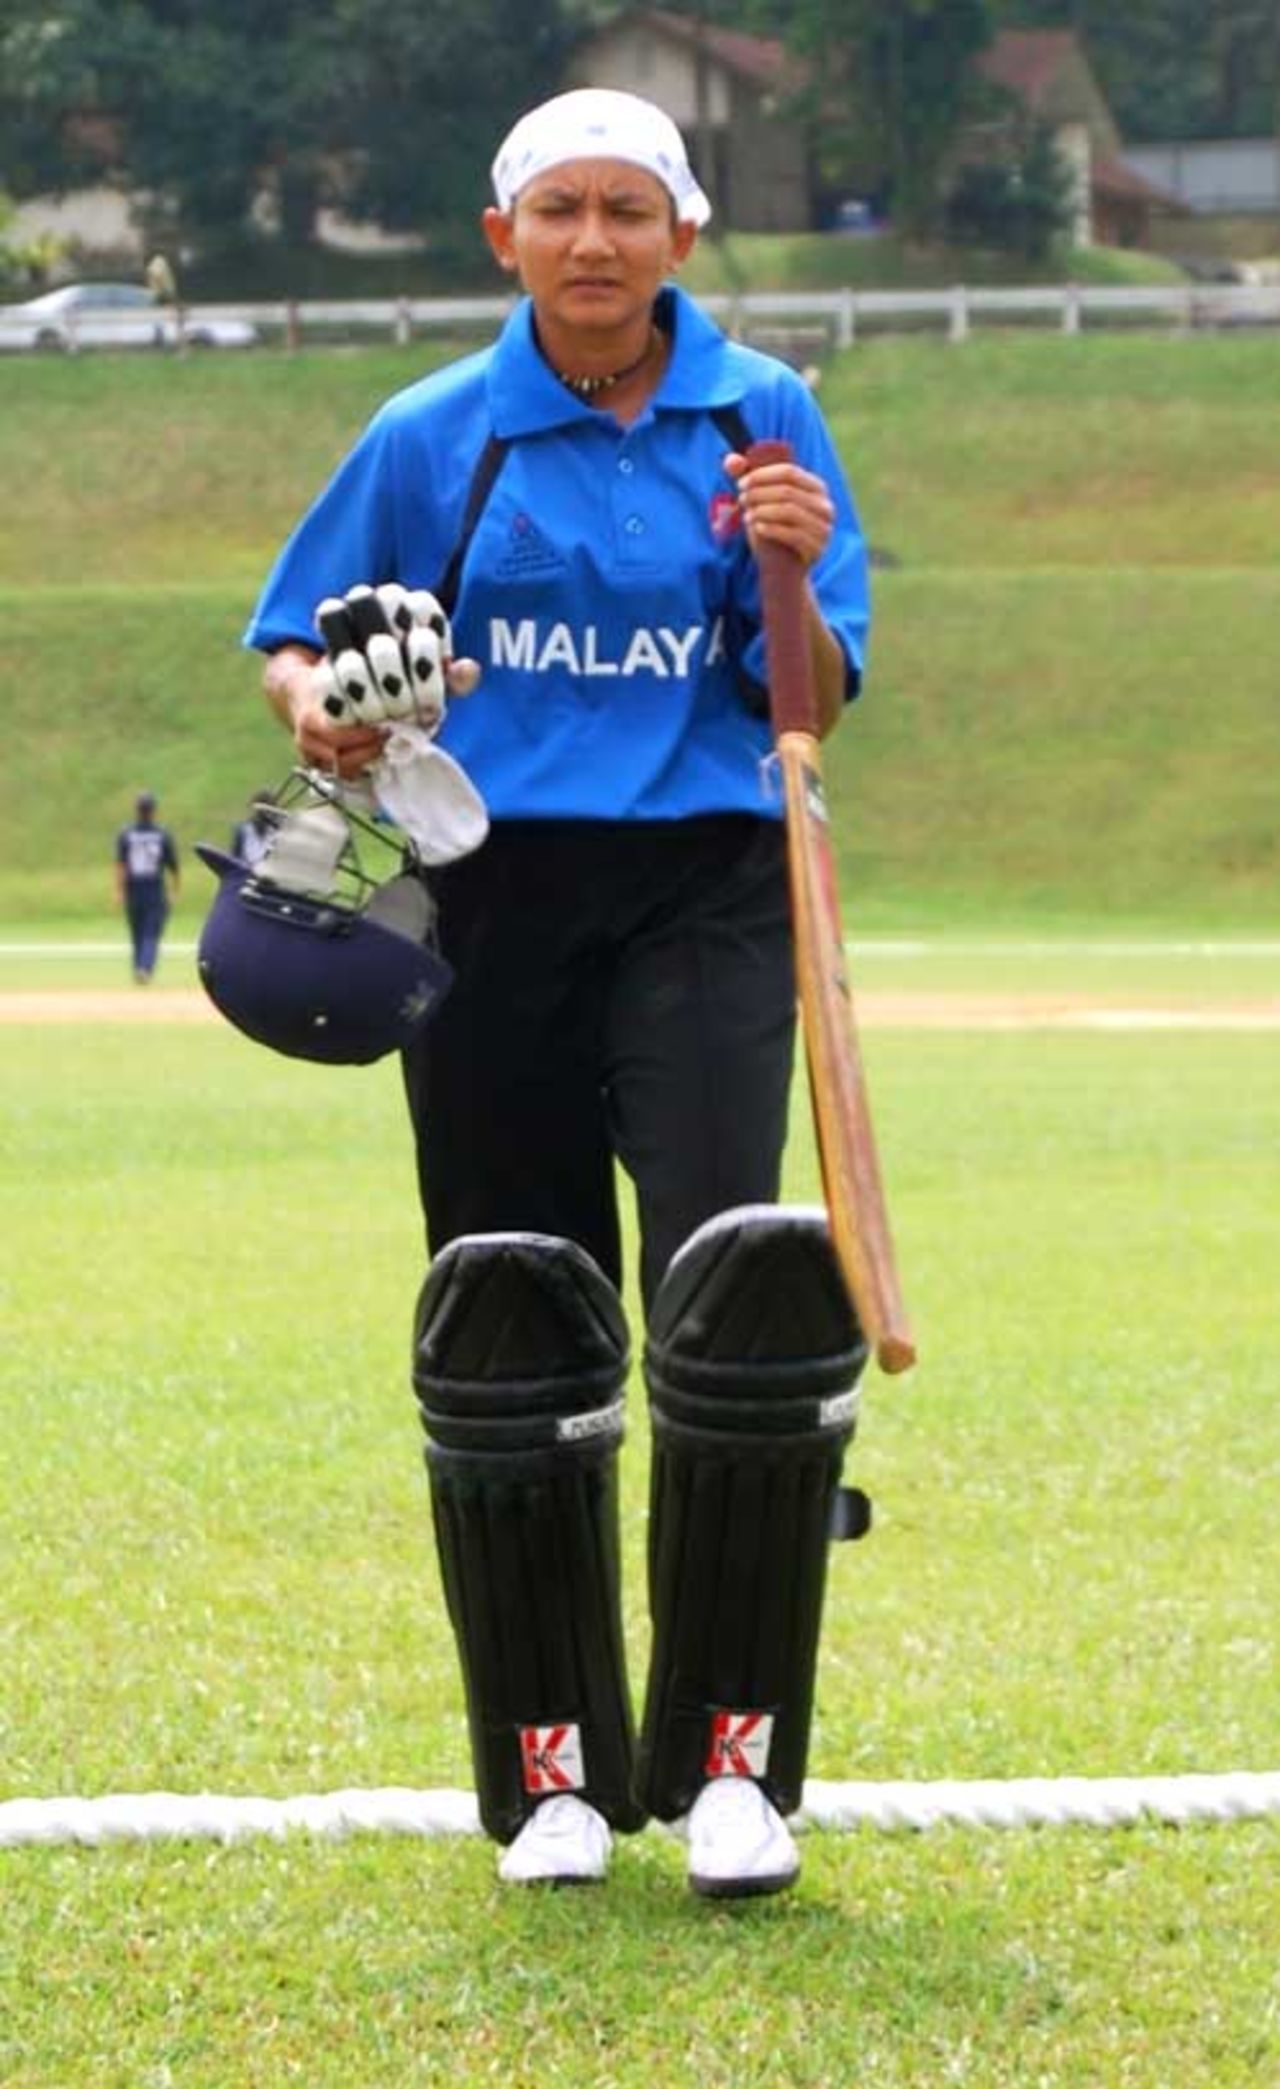 Arina Rahim, the Malaysian captain, after her side won their game against Thailand by 61 runs, Malaysia women v Thailand women, ACC women's tournament, Johor, July 16, 2007